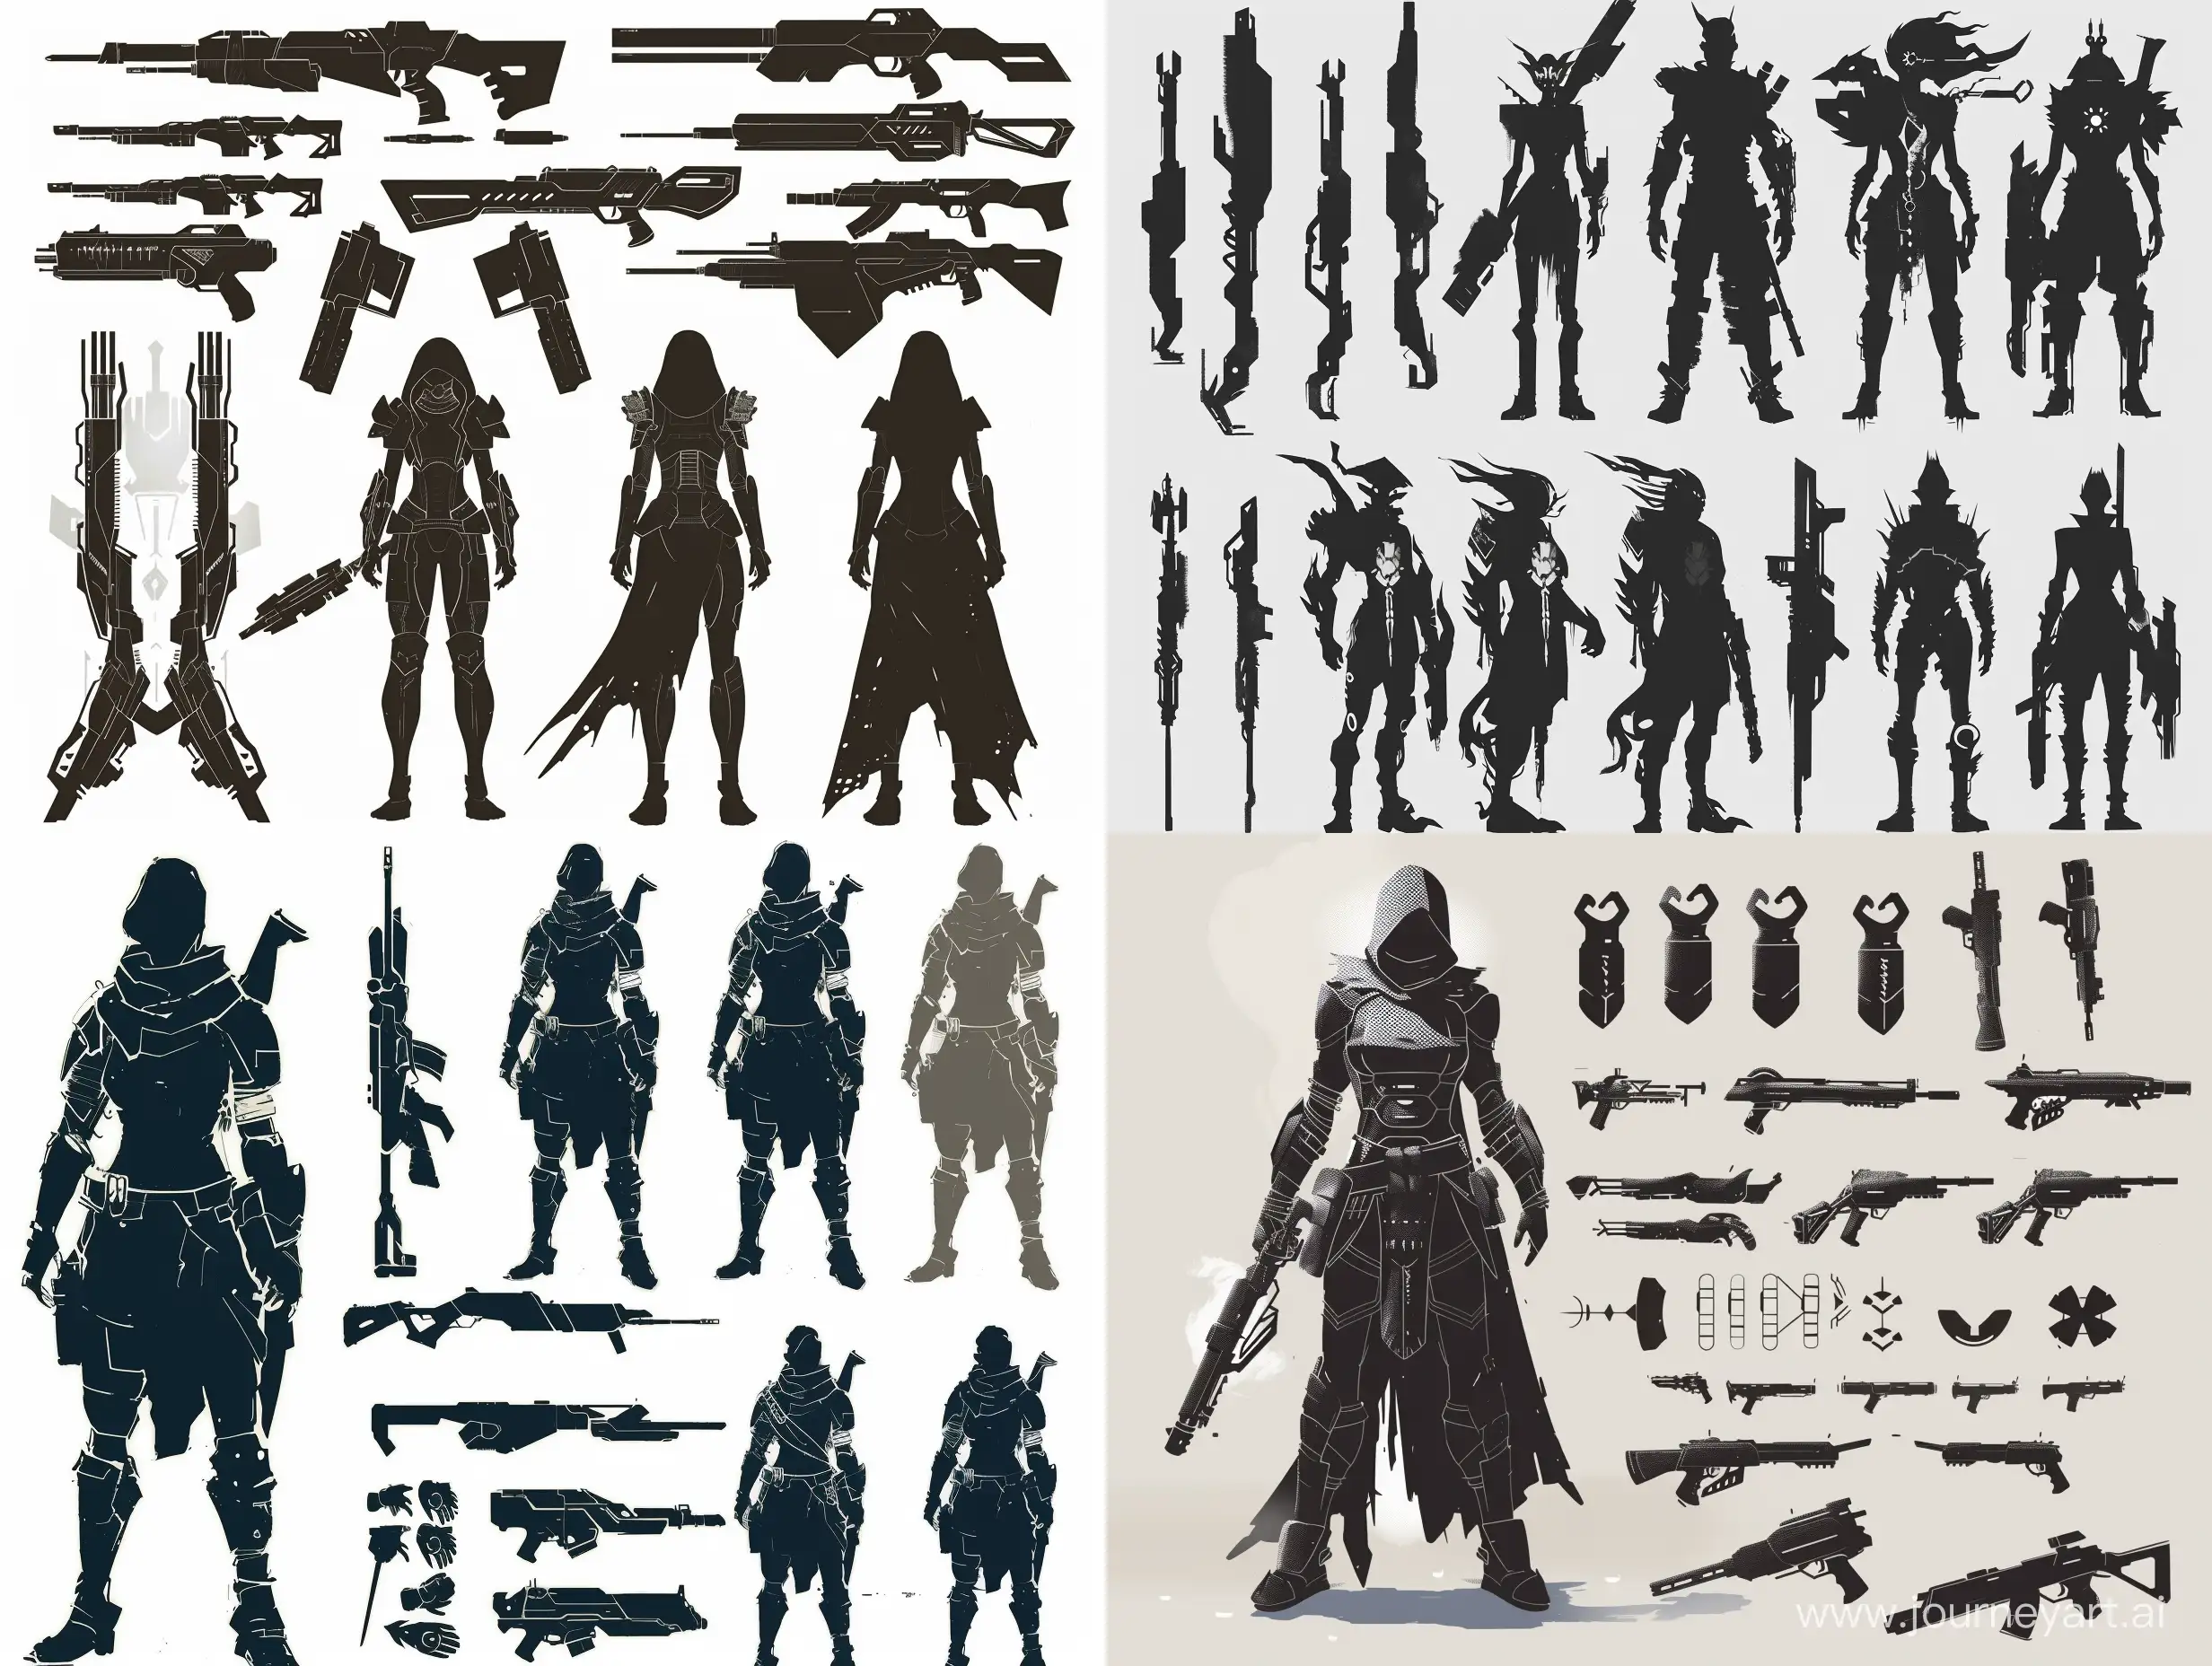 SciFi-Bounty-Hunter-Silhouette-Exploration-with-Diverse-Weaponry